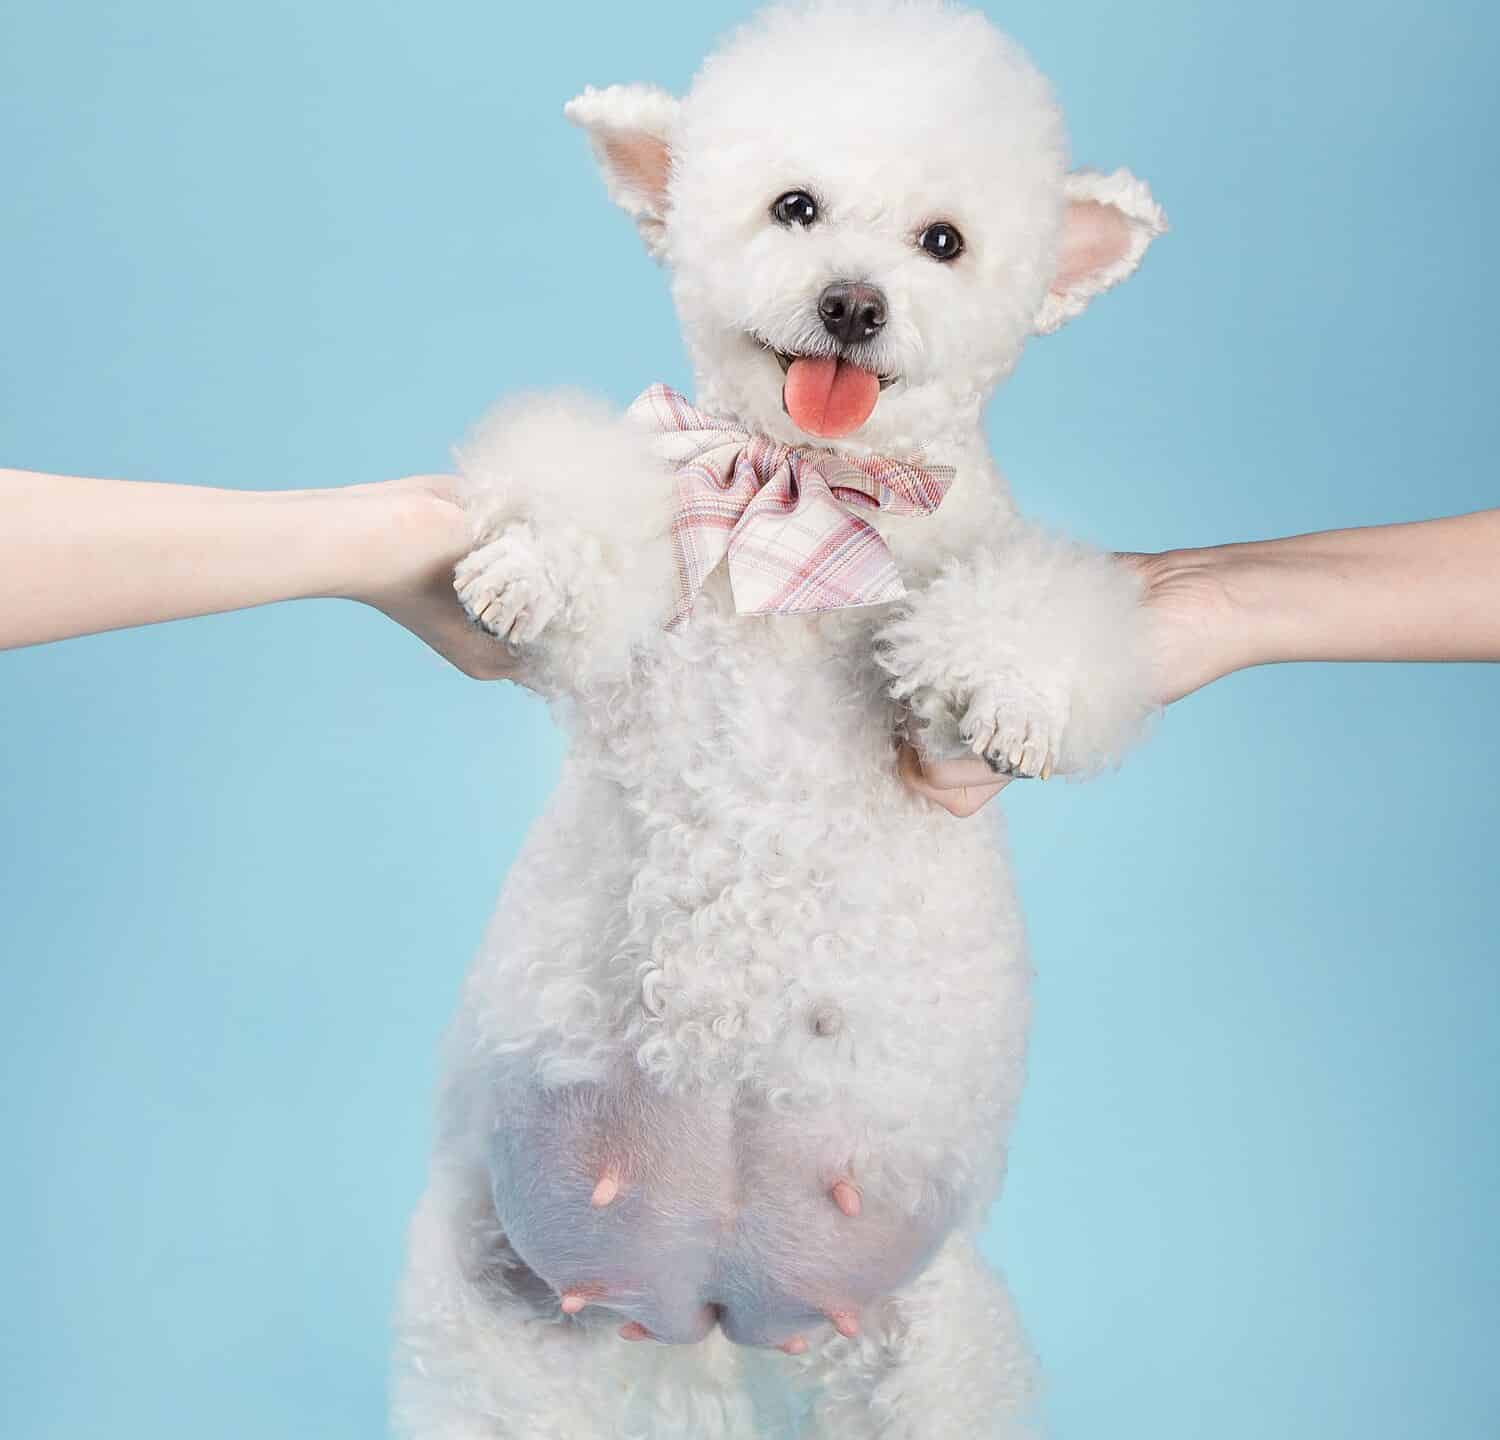 Pregnant white poodle wearing a tie, indoors, clean blue background.